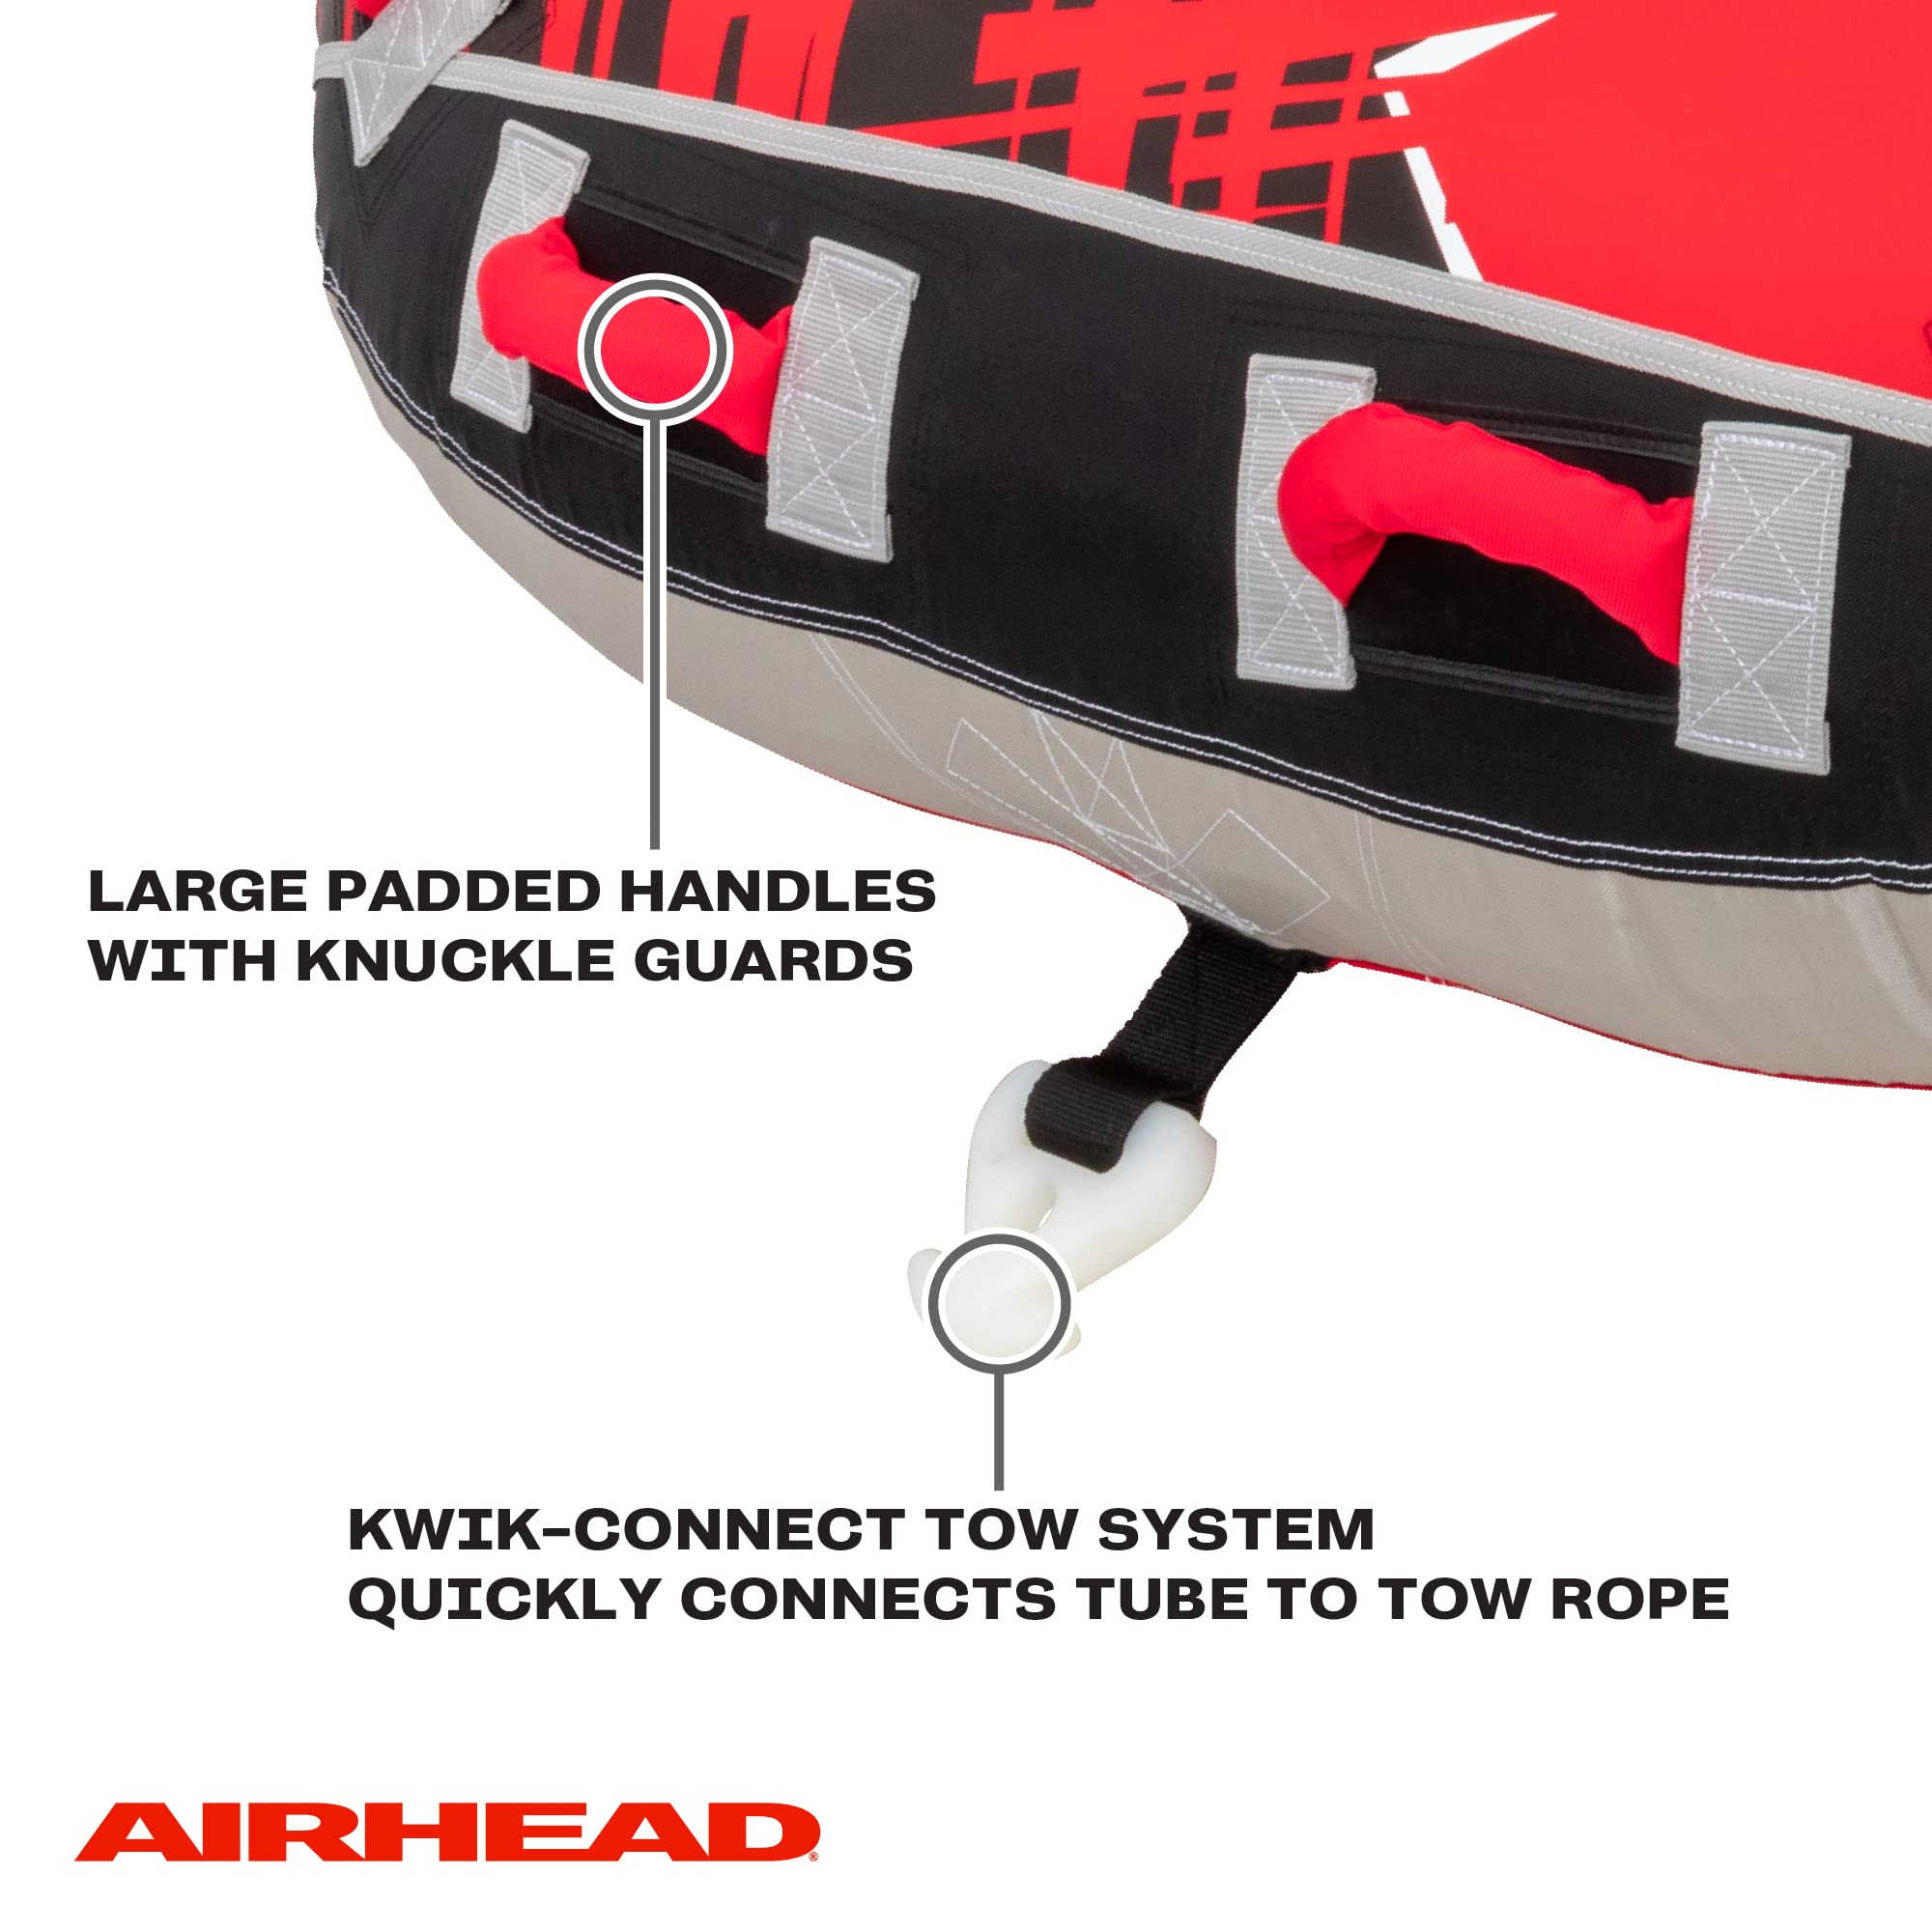 AirHead G-Force 3 Towable 1-3 Rider Tube for Boating and Water Sports, Heavy Duty Full Nylon Cover with Zipper, EVA Foam Pads, and Patented Speed Safety Valve for Easy Inflating & Deflating,Red